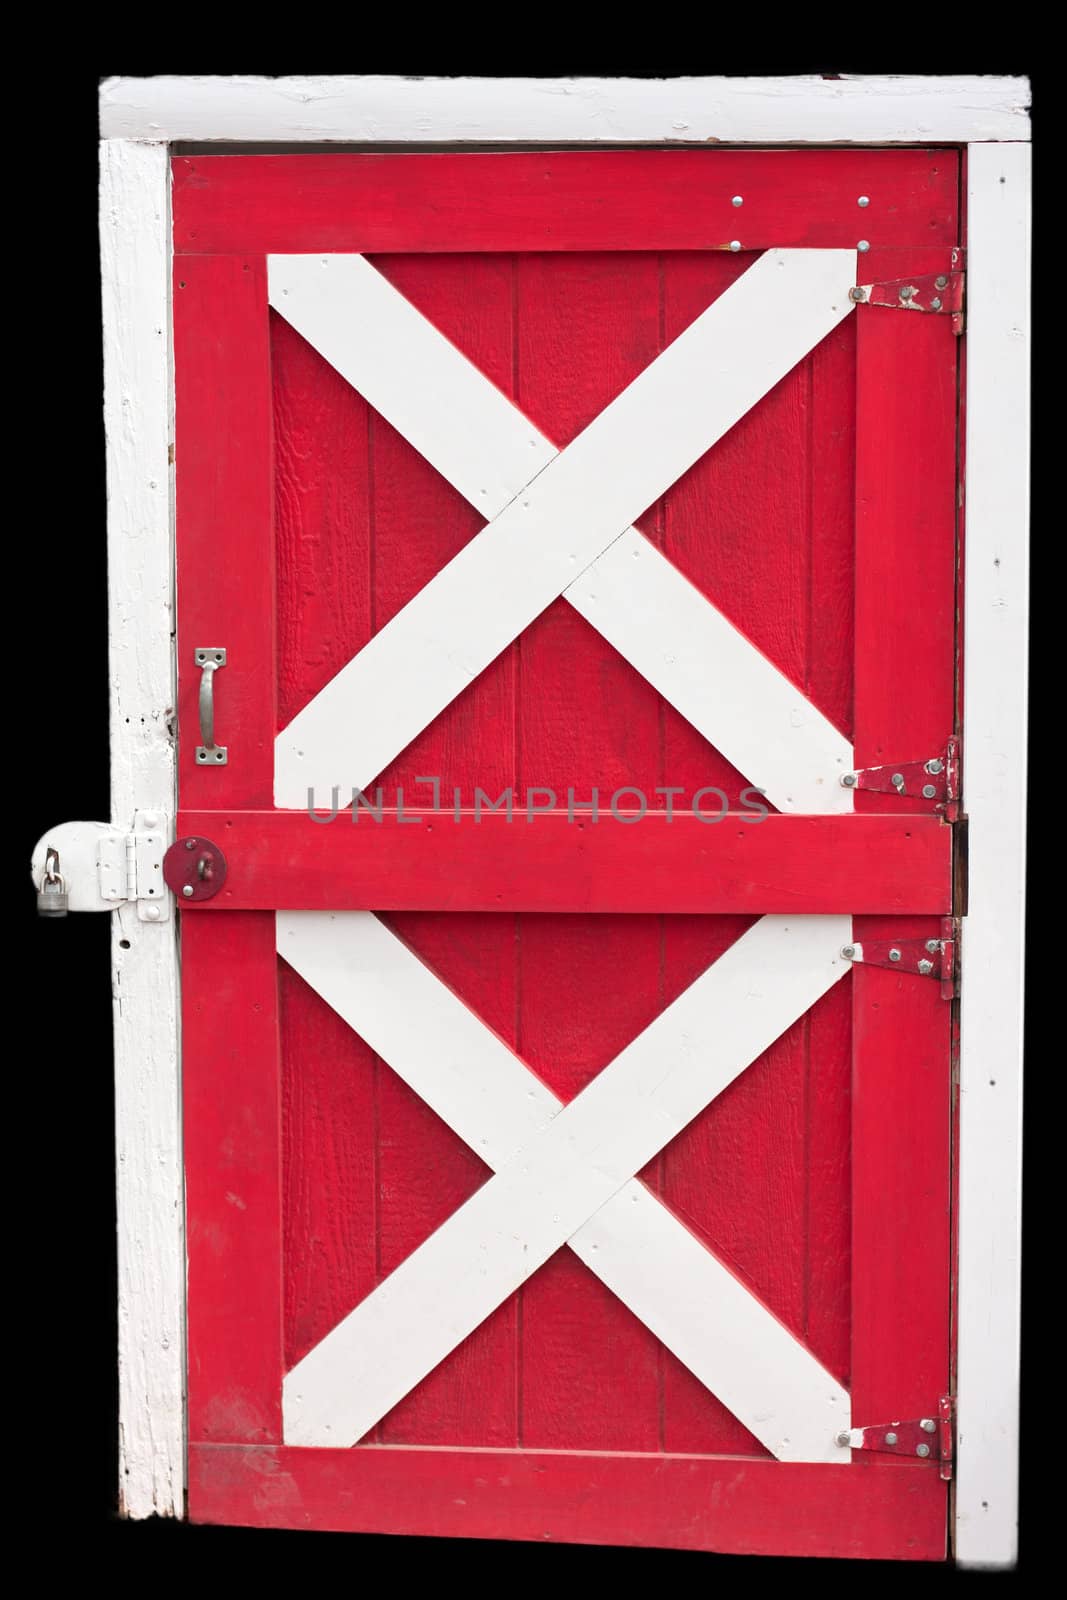 Barn Door locked, isolated in red and white